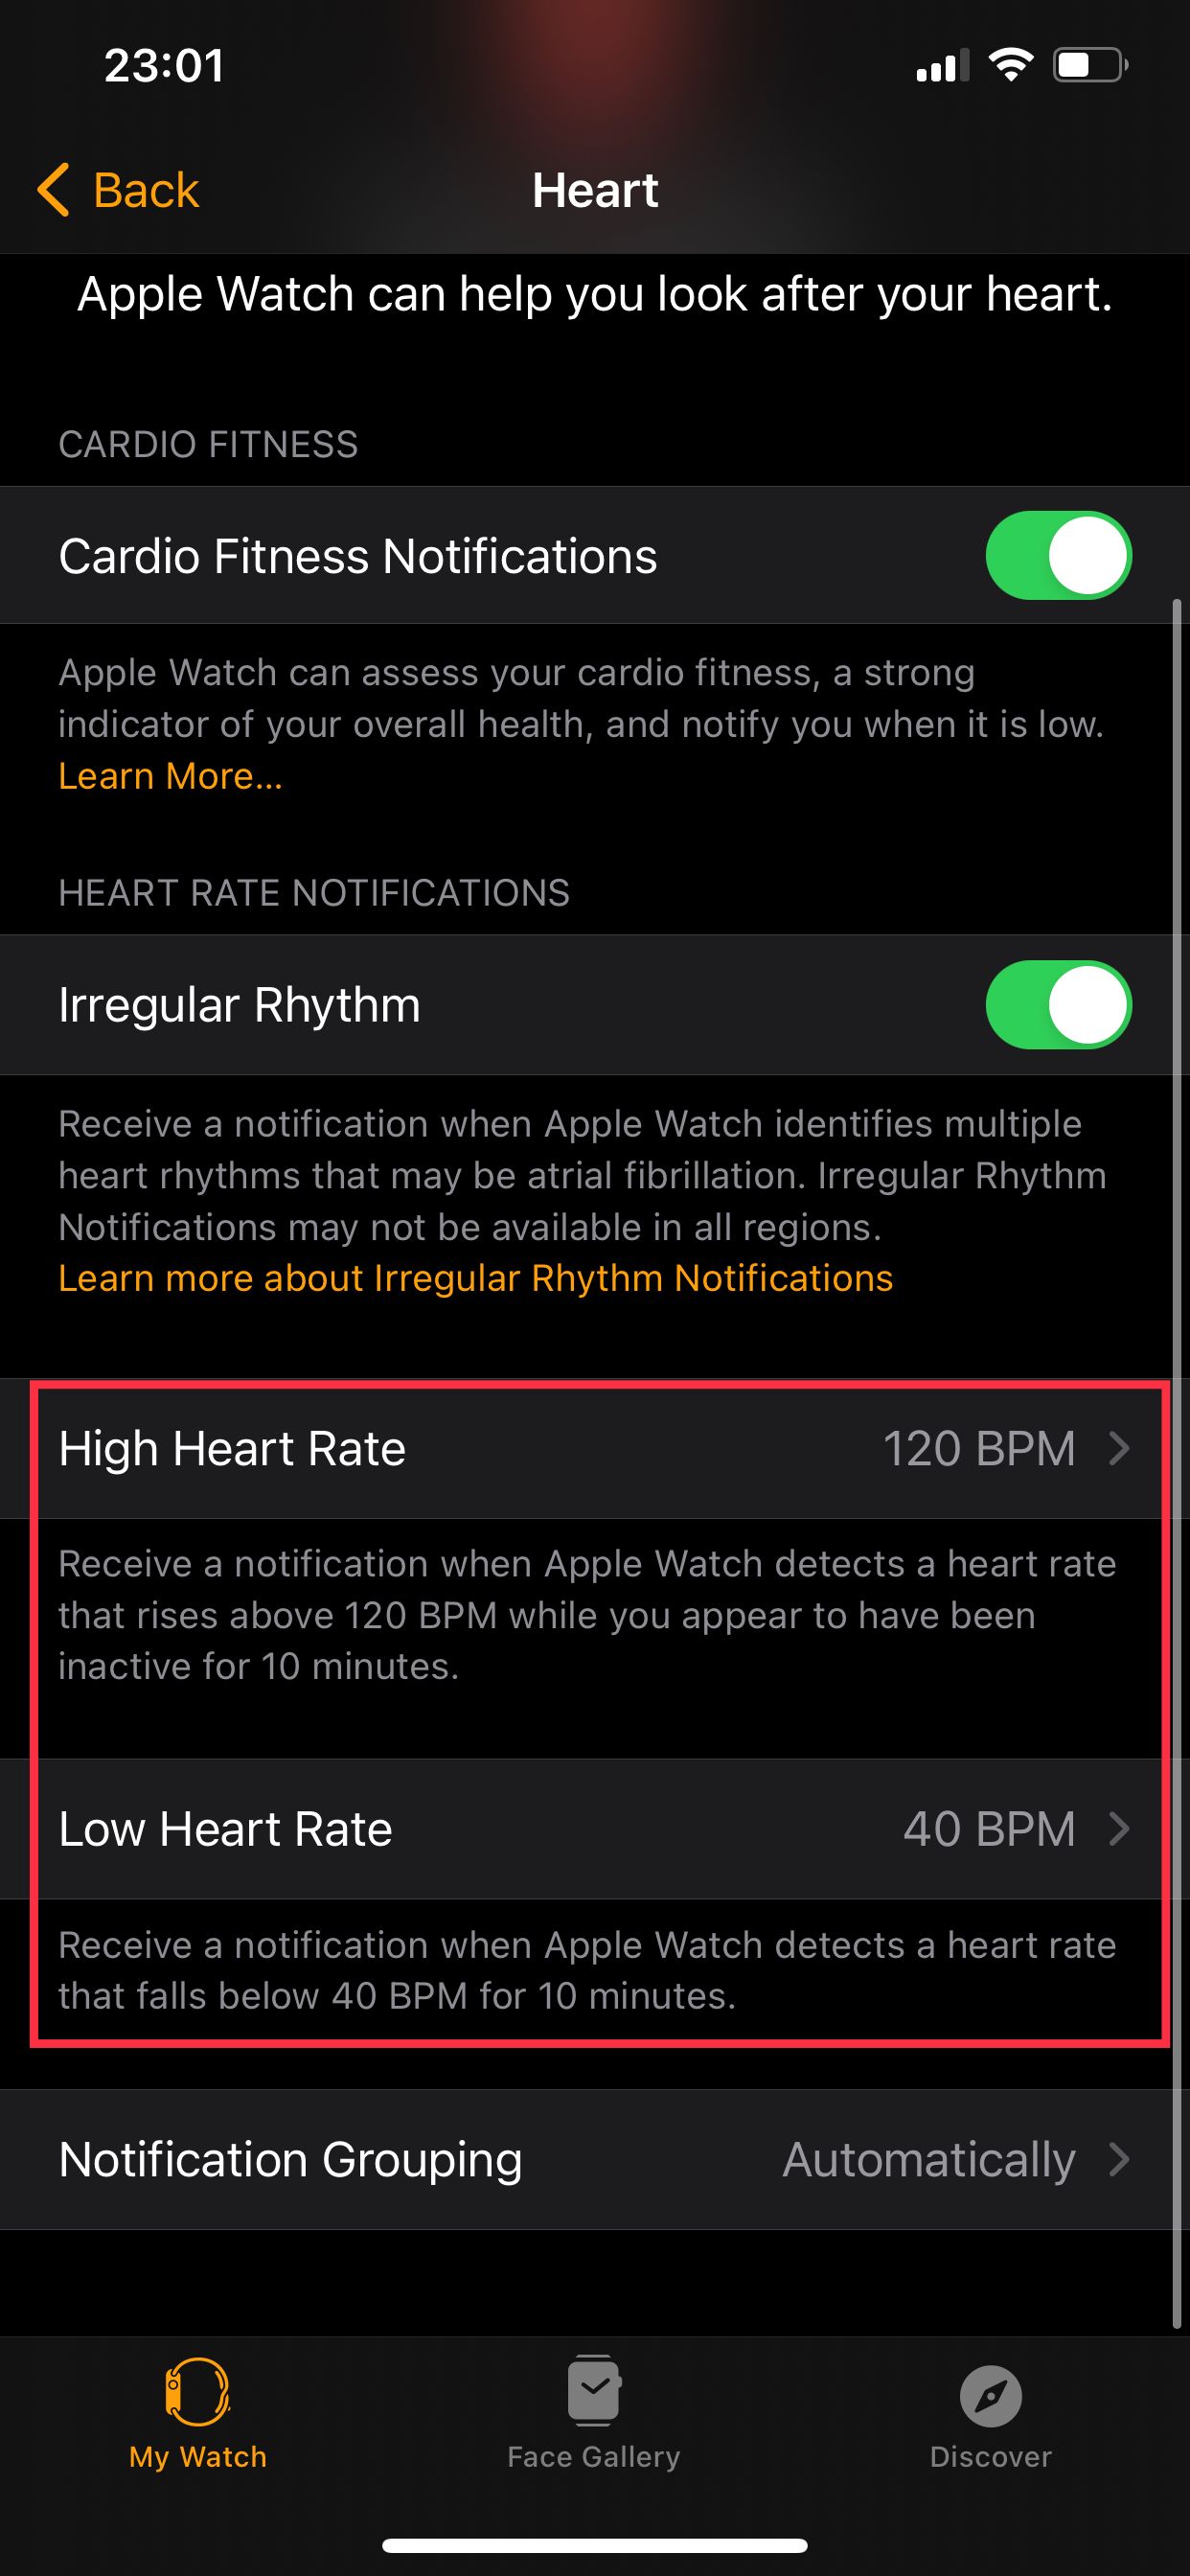 High and Low Heart Rate options in Watch settings.